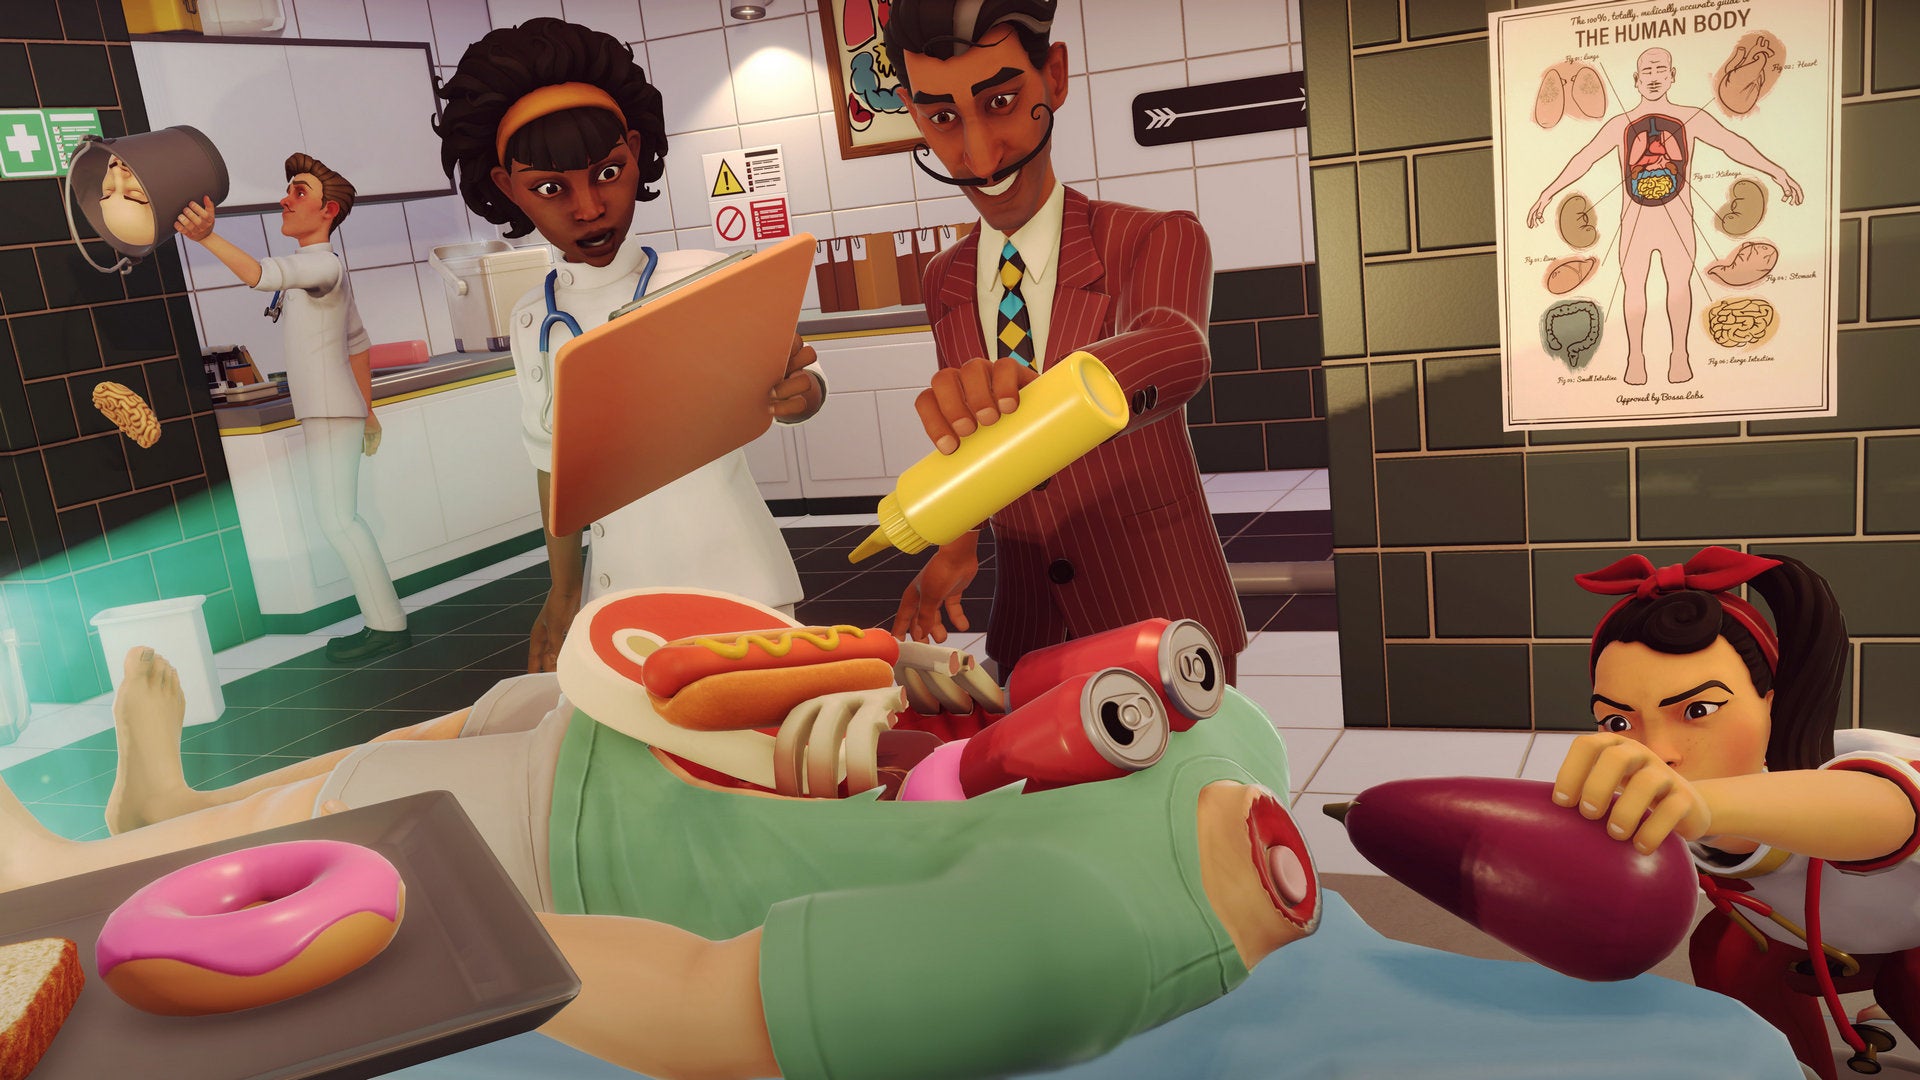 A man pours mustard into the open stomach of a man with a severed head in Surgeon Simulator 2